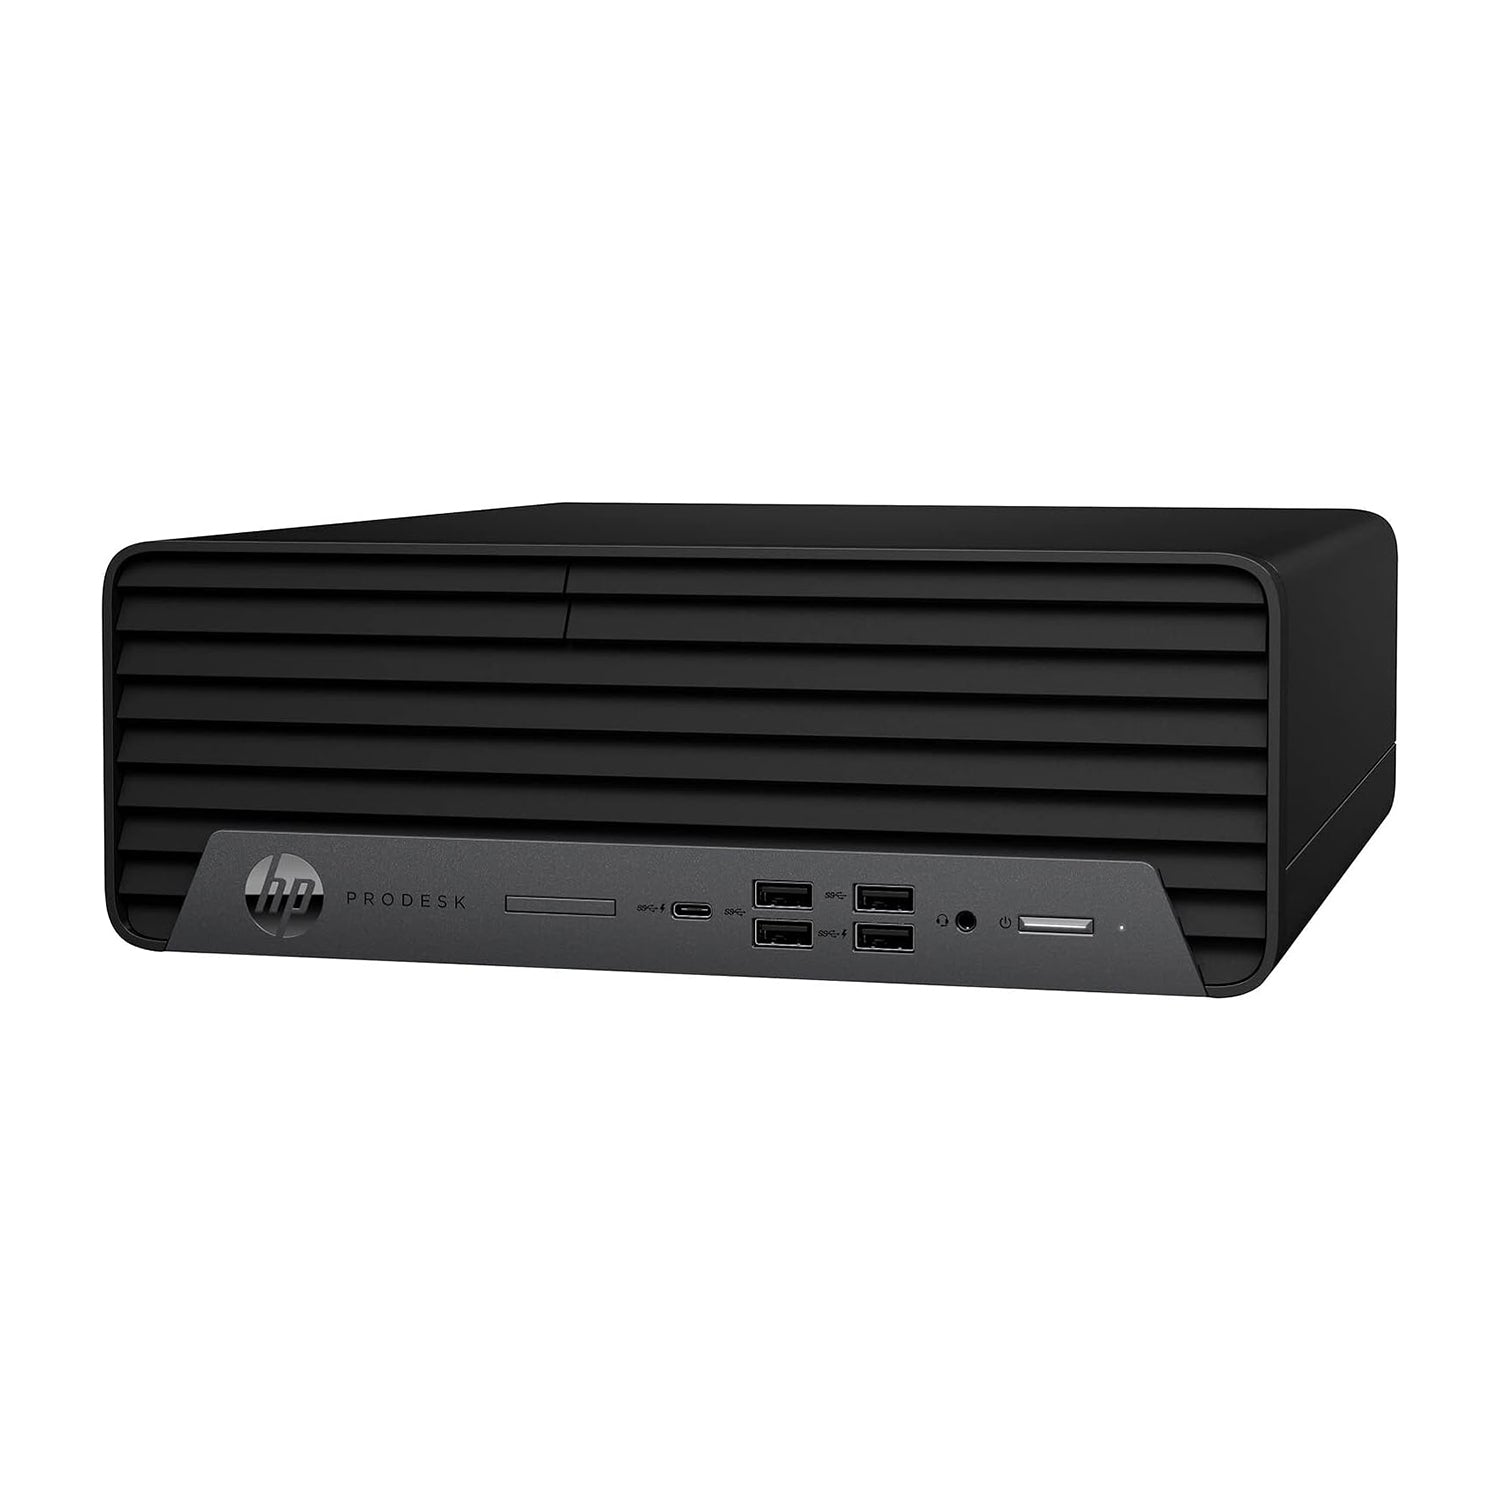 HP ProDesk 600 G6 SFF Business Desktop Computer PC(Intel Core i5 - 10th Gen up to 4.50 GHz Processor| 16GB - 32GB DDR4 RAM| 1TB - 2TB SSD| WINDOWS 11 PRO) Wireless Keyboard and Mouse - Refurbished